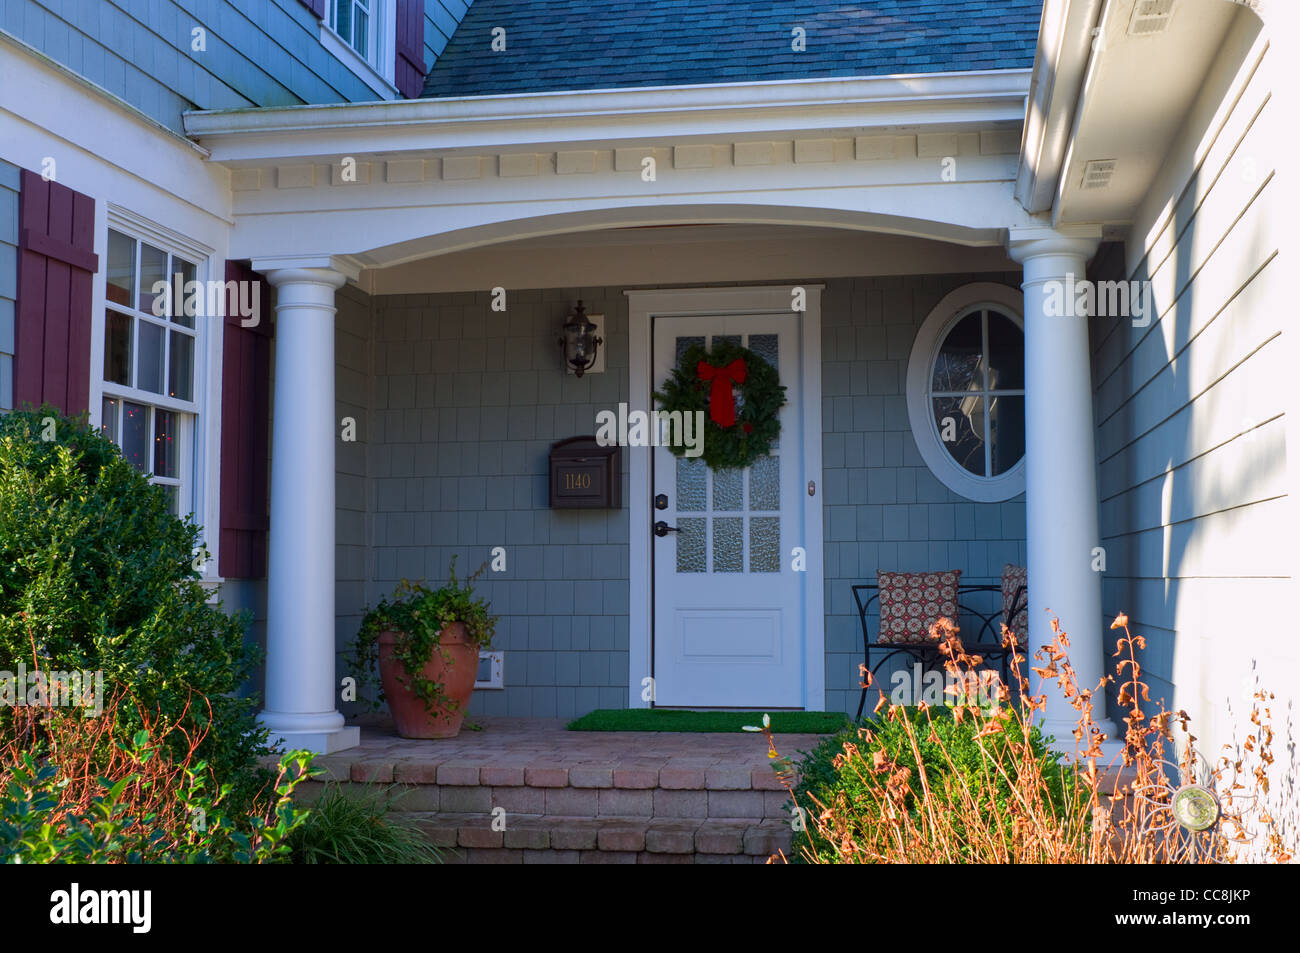 Private residence front porch and entrance adorned with Christmas wreath Stock Photo